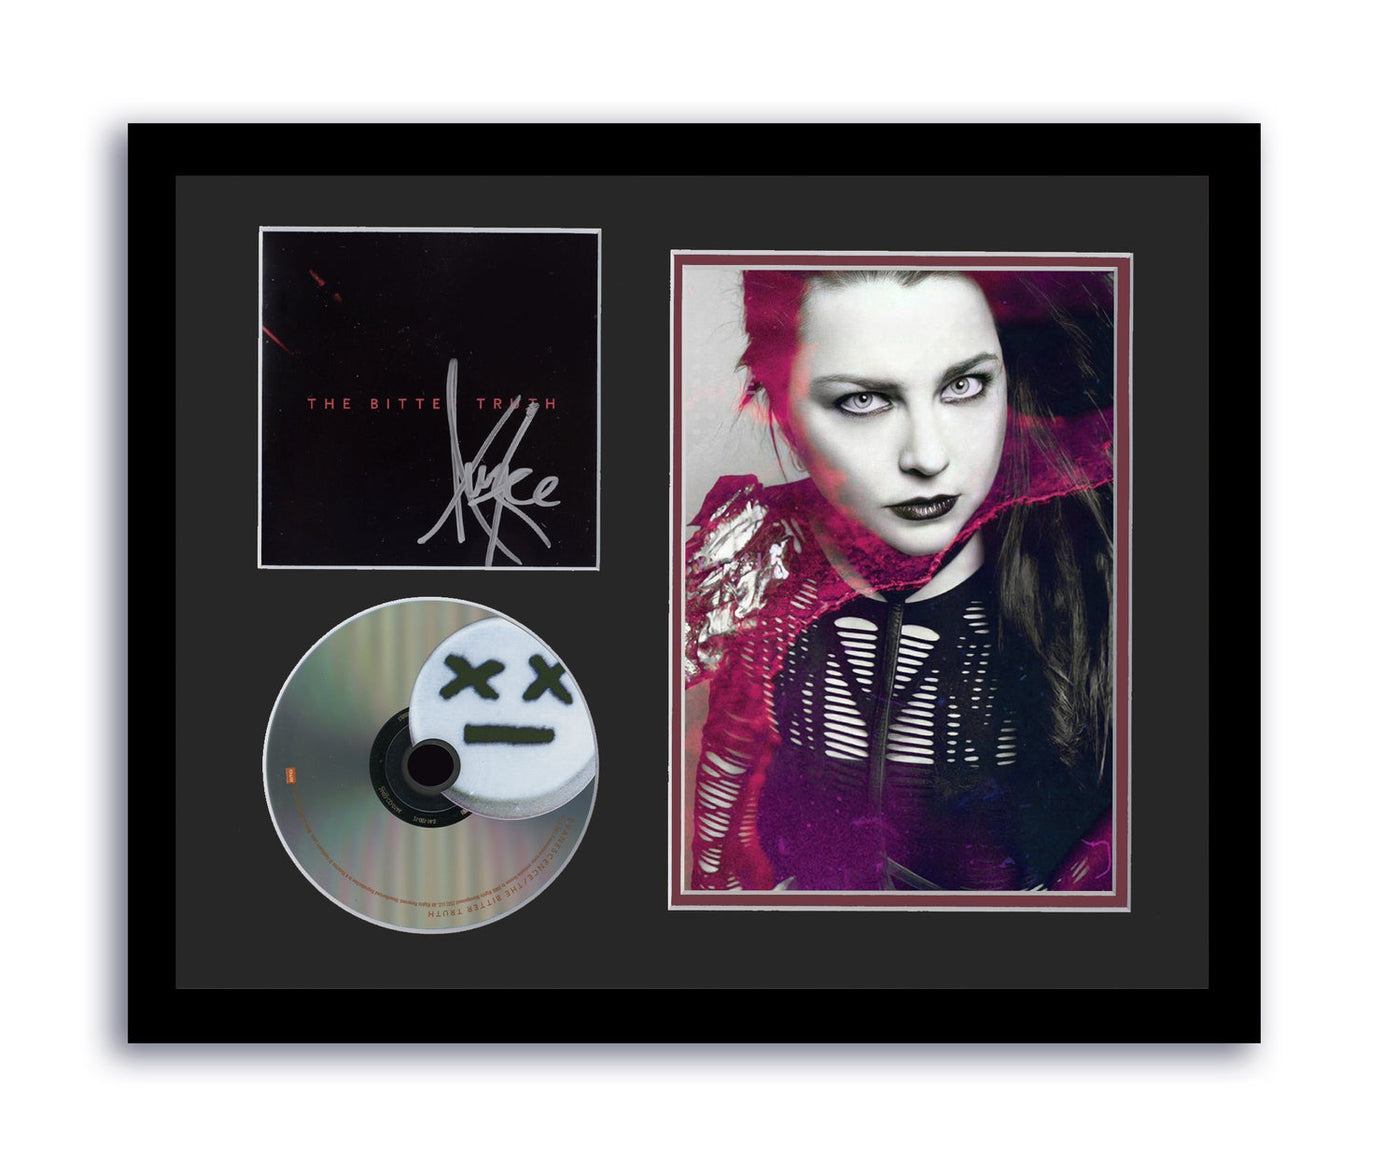 Evanescence Amy Lee Autographed 11x14 Custom Framed CD Photo Bitter Truth Signed ACOA 8